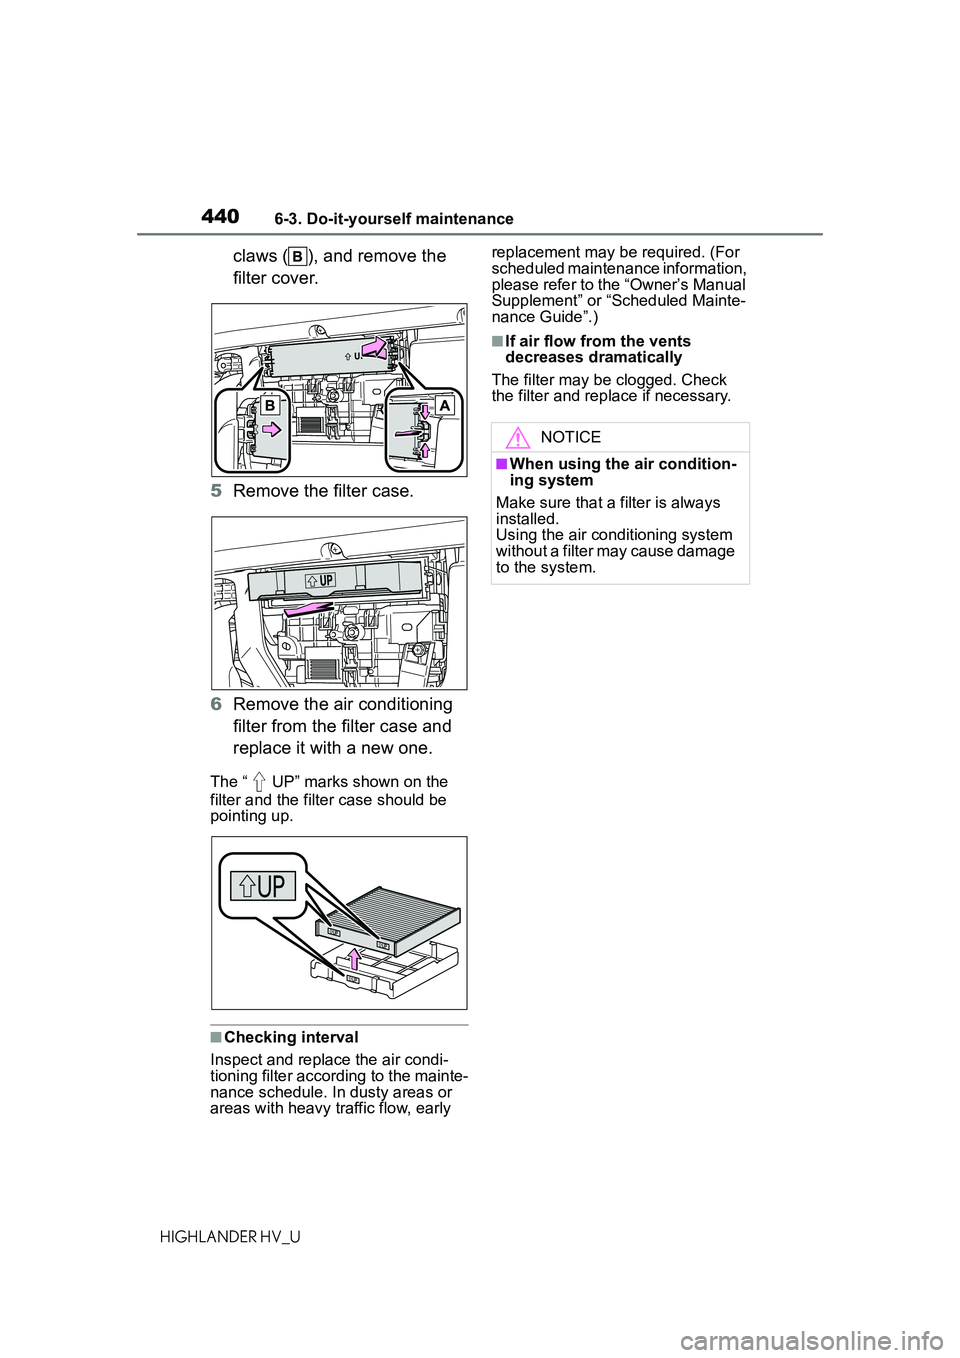 TOYOTA HIGHLANDER HYBRID 2021  Owners Manual (in English) 4406-3. Do-it-yourself maintenance
HIGHLANDER HV_U
claws ( ), and remove the 
filter cover.
5 Remove the filter case.
6 Remove the air conditioning 
filter from the filter case and 
replace it with a 